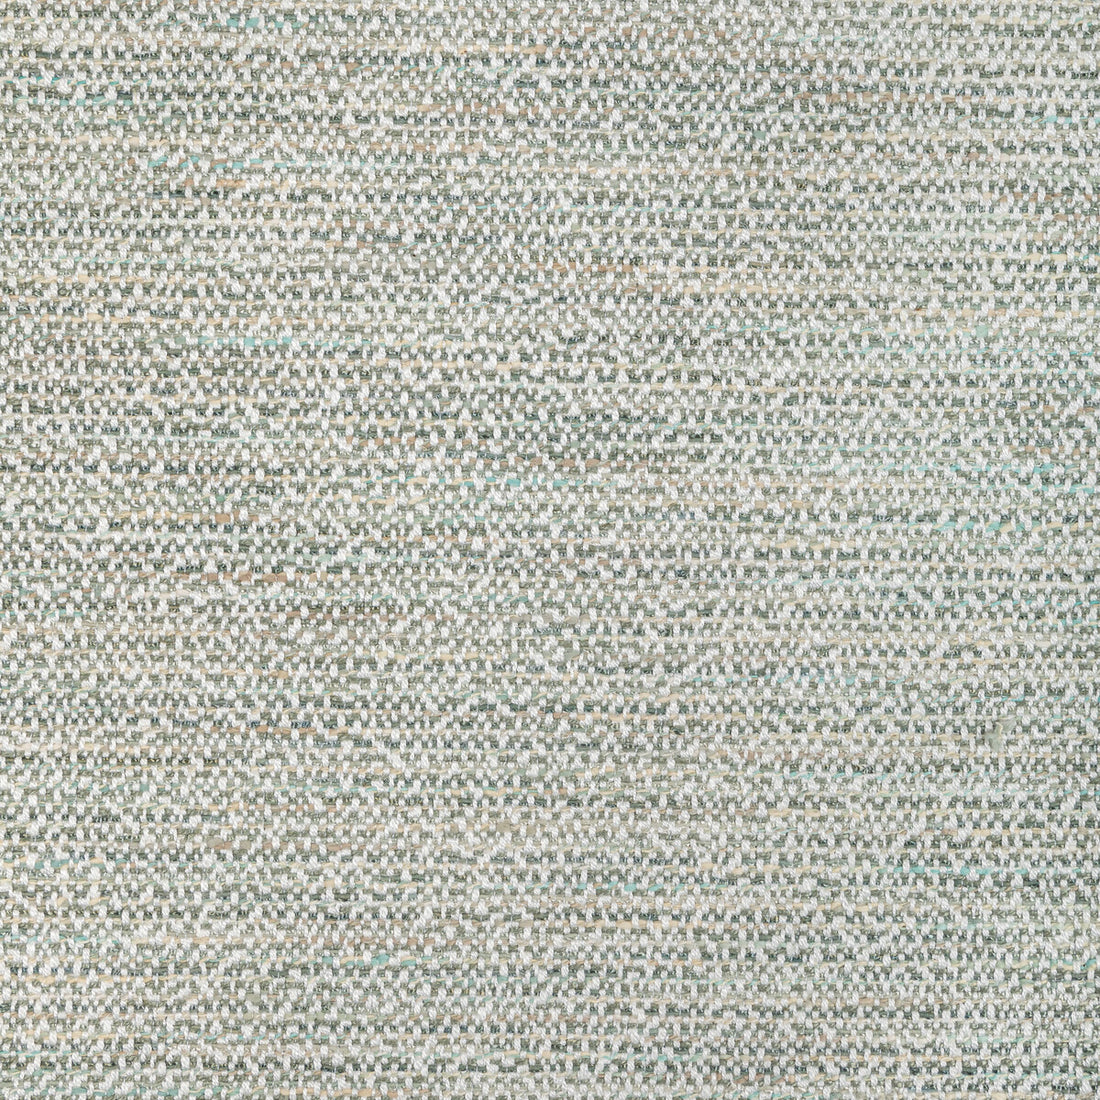 Variance fabric in jade color - pattern 36333.316.0 - by Kravet Couture in the Modern Luxe III collection